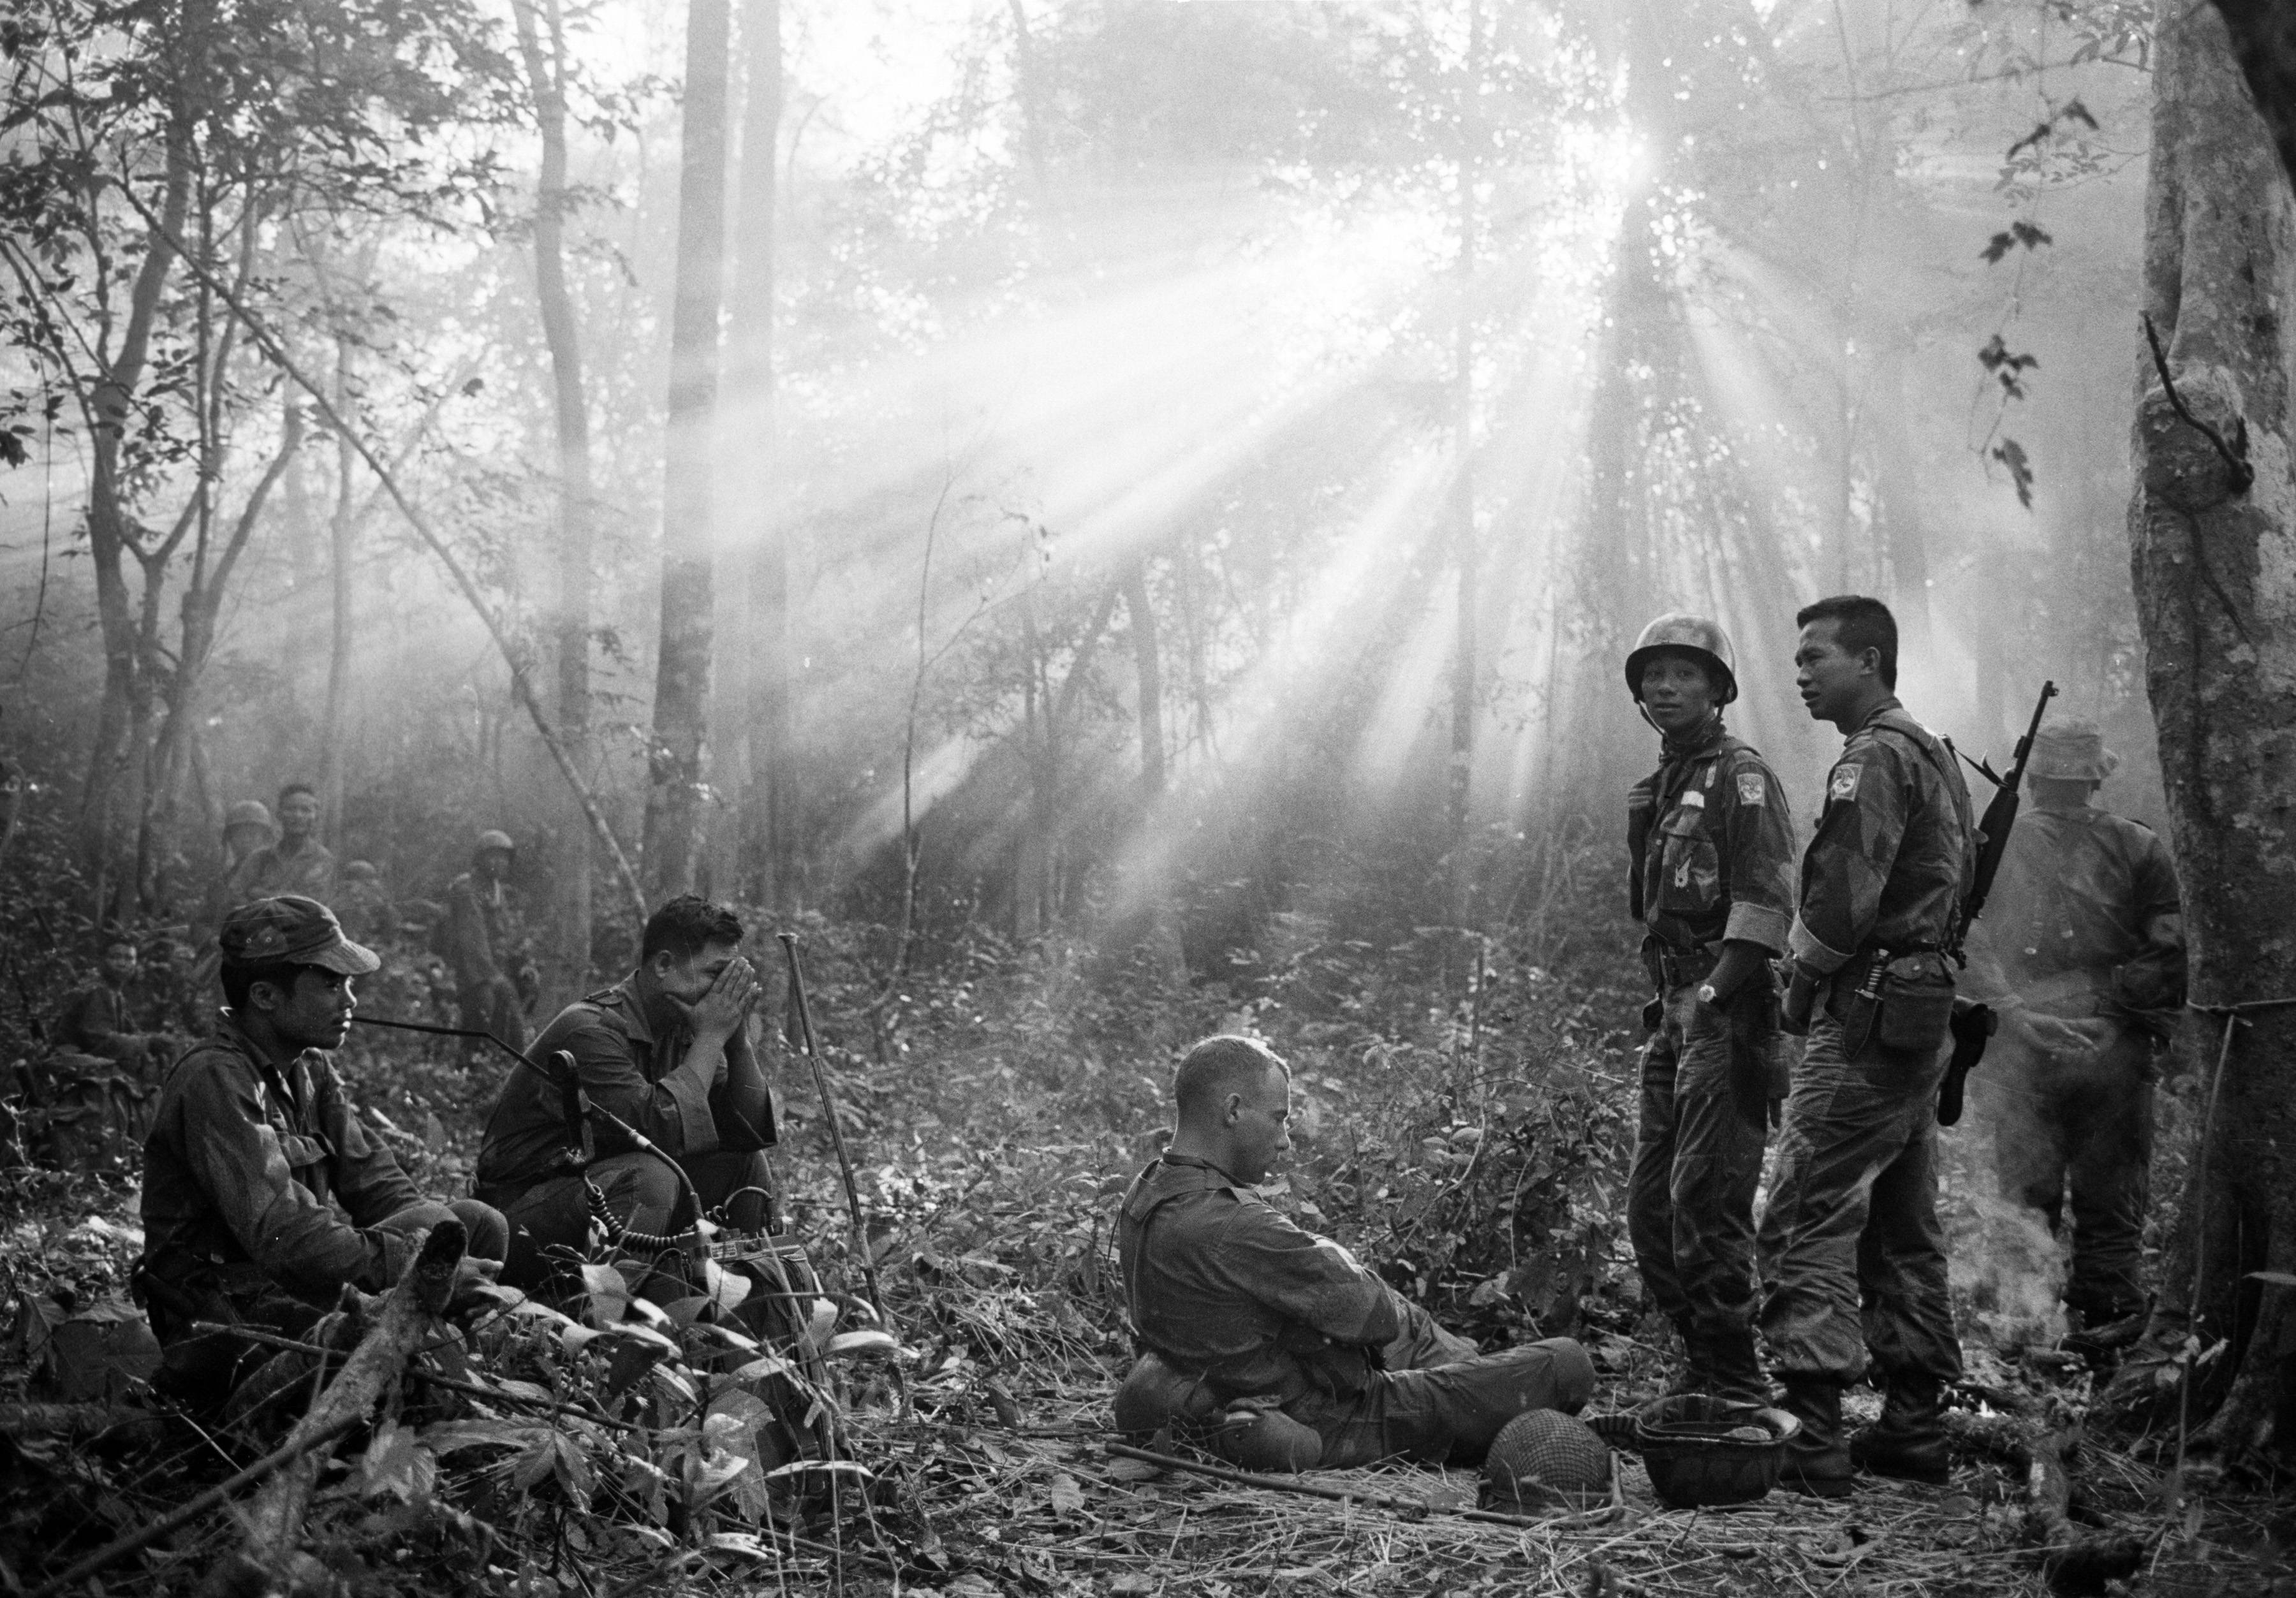 Horst Faas picture of Vietnamese and US troops rest after a tense night awaiting a Viet Cong ambush near the village of Binh Gia. January 1965